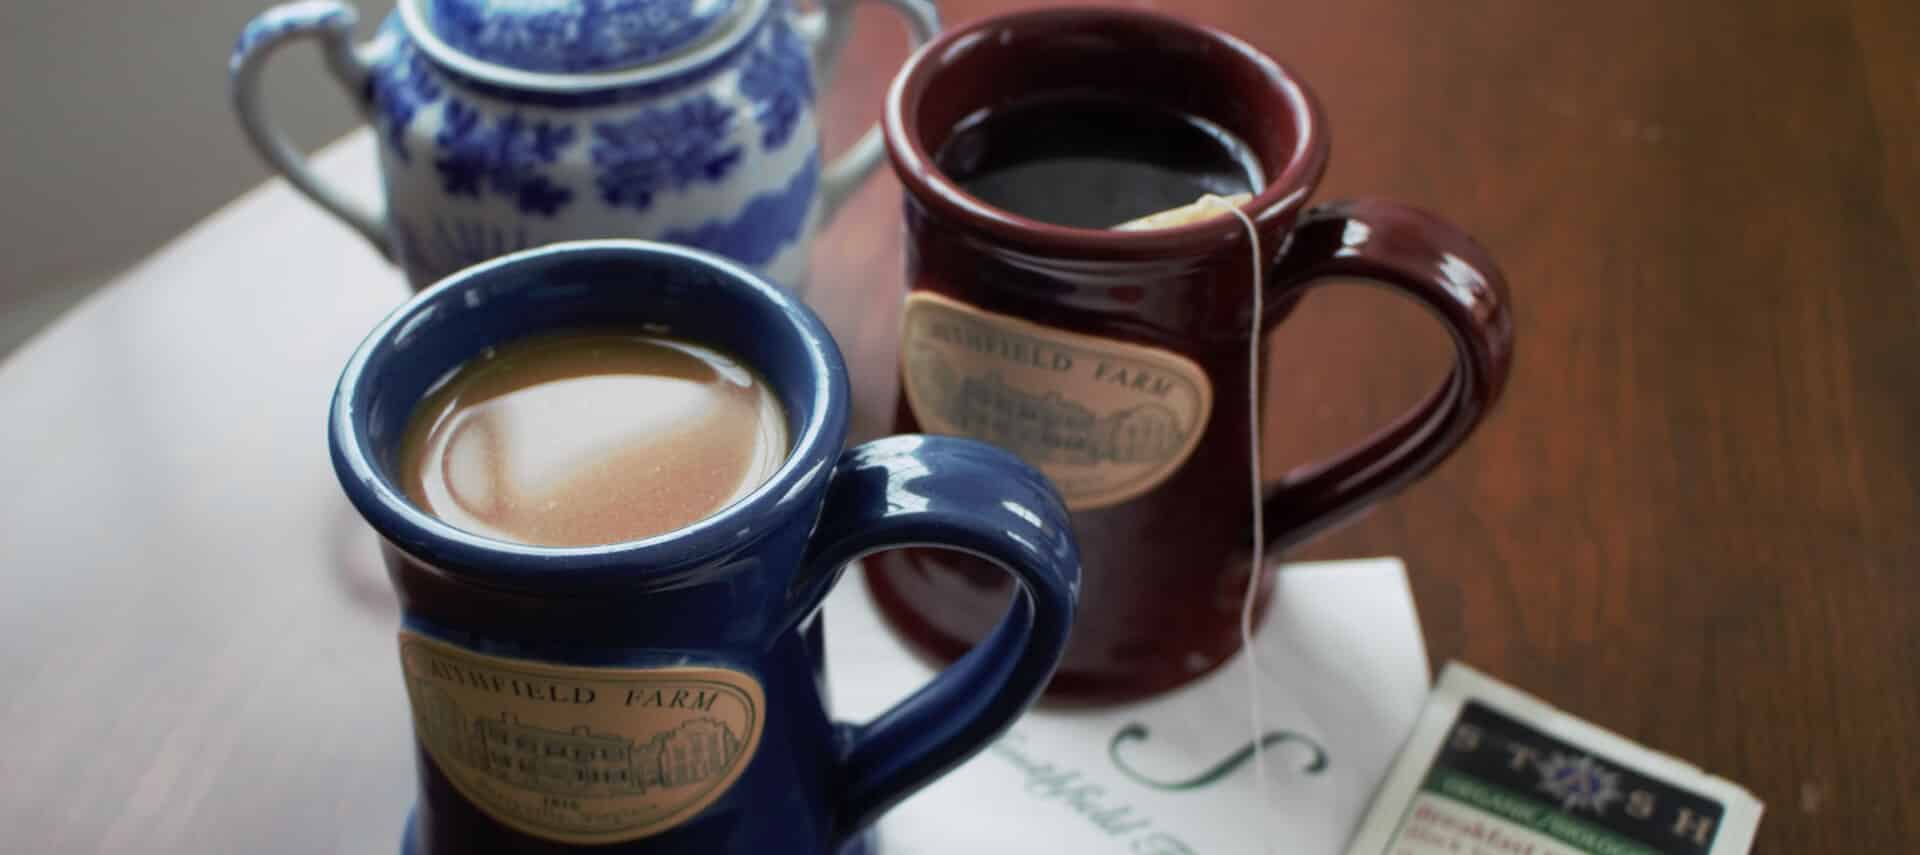 Two coffee mugs with the Smithfield Farm Bed and Breakfast logo on them